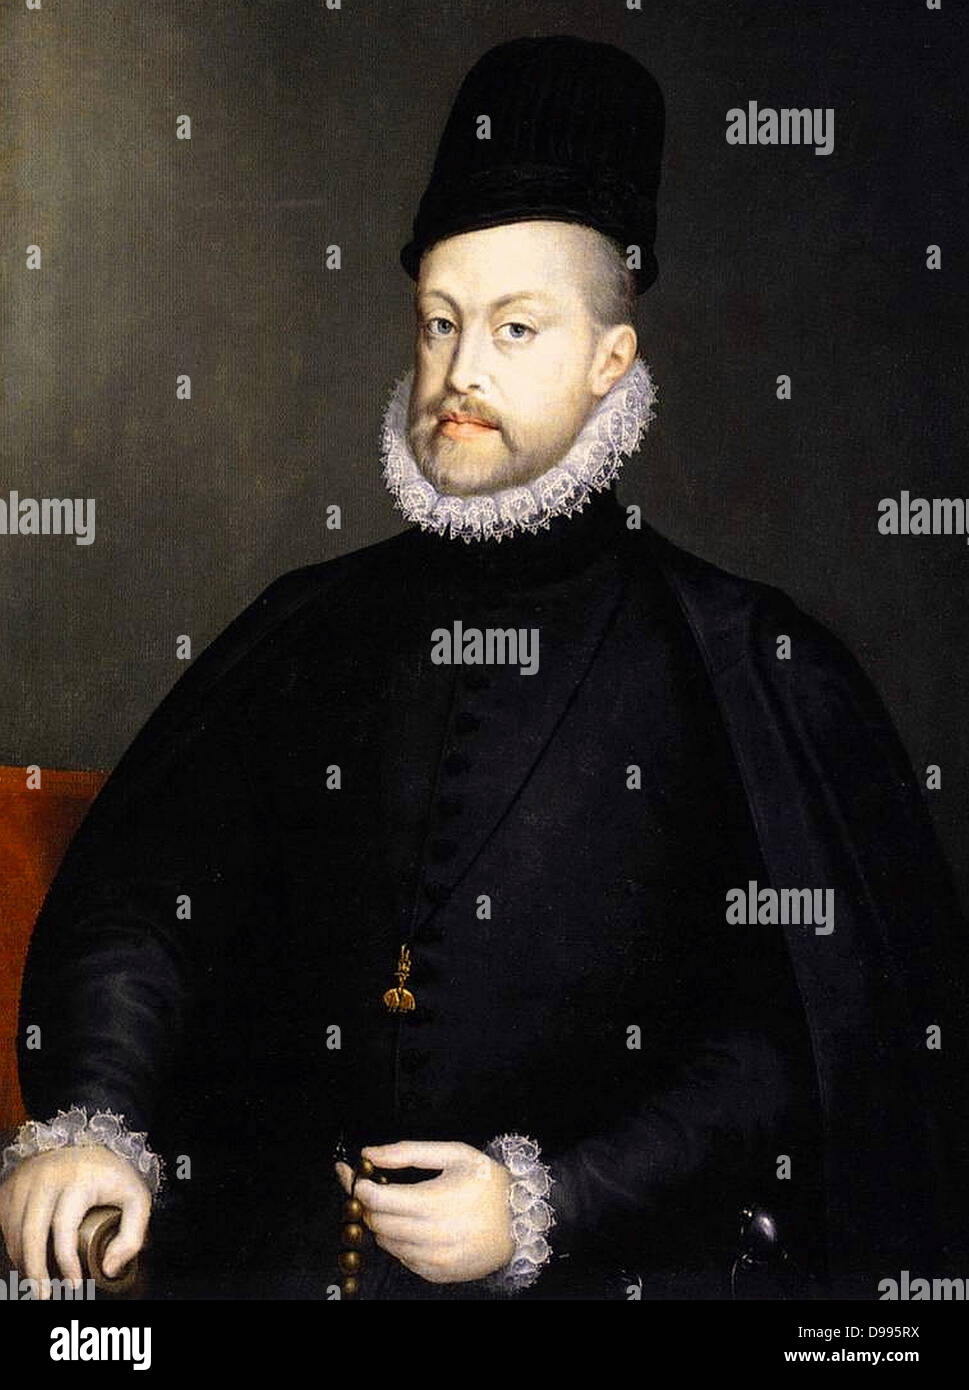 Philip II (May 21, 1527 – September 13, 1598)  King of Spain from 1556 until 1598, King of Naples from 1554 until 1598, king consort of England (as husband of Mary I) from 1554 to 1558, King of Portugal and the Algarves (as Philip I) from 1580 until 1598 and King of Chile from 1554 until 1556. Painted by Alonso Sánchez Coello (1527-1625) and is located in Prado, Madrid. Stock Photo